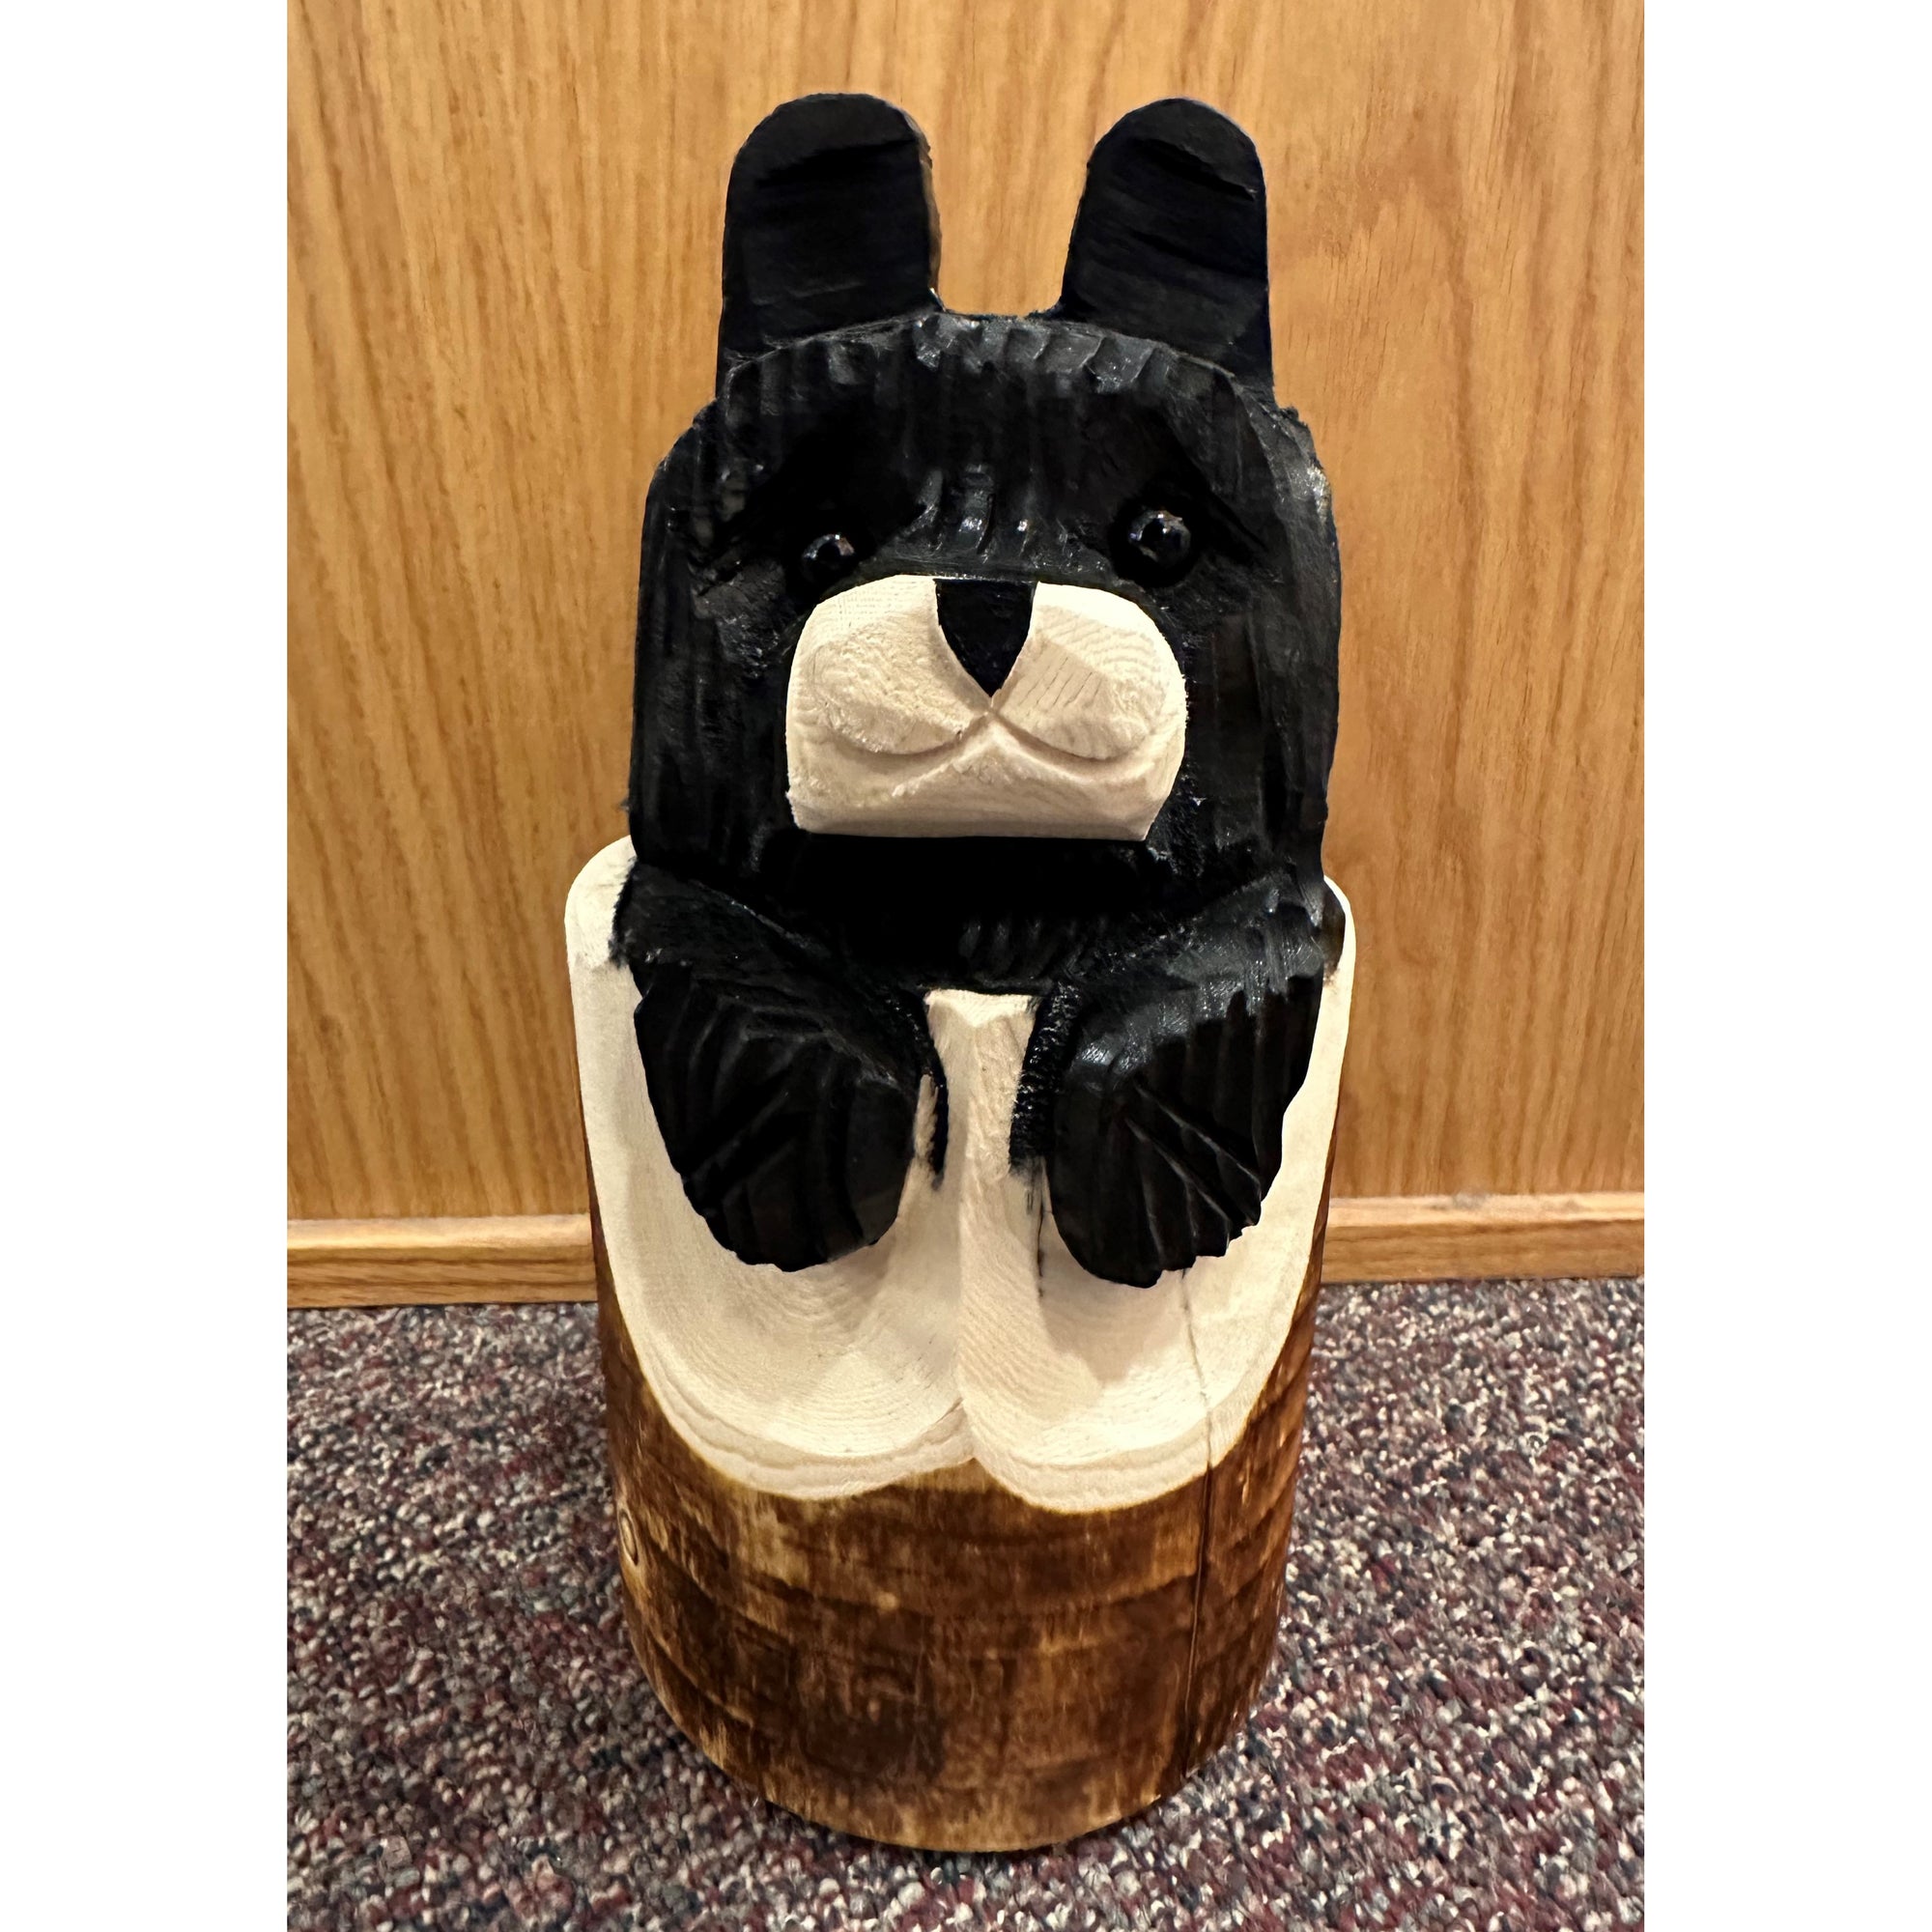 Wood Carved Bear in Stump 10 inch